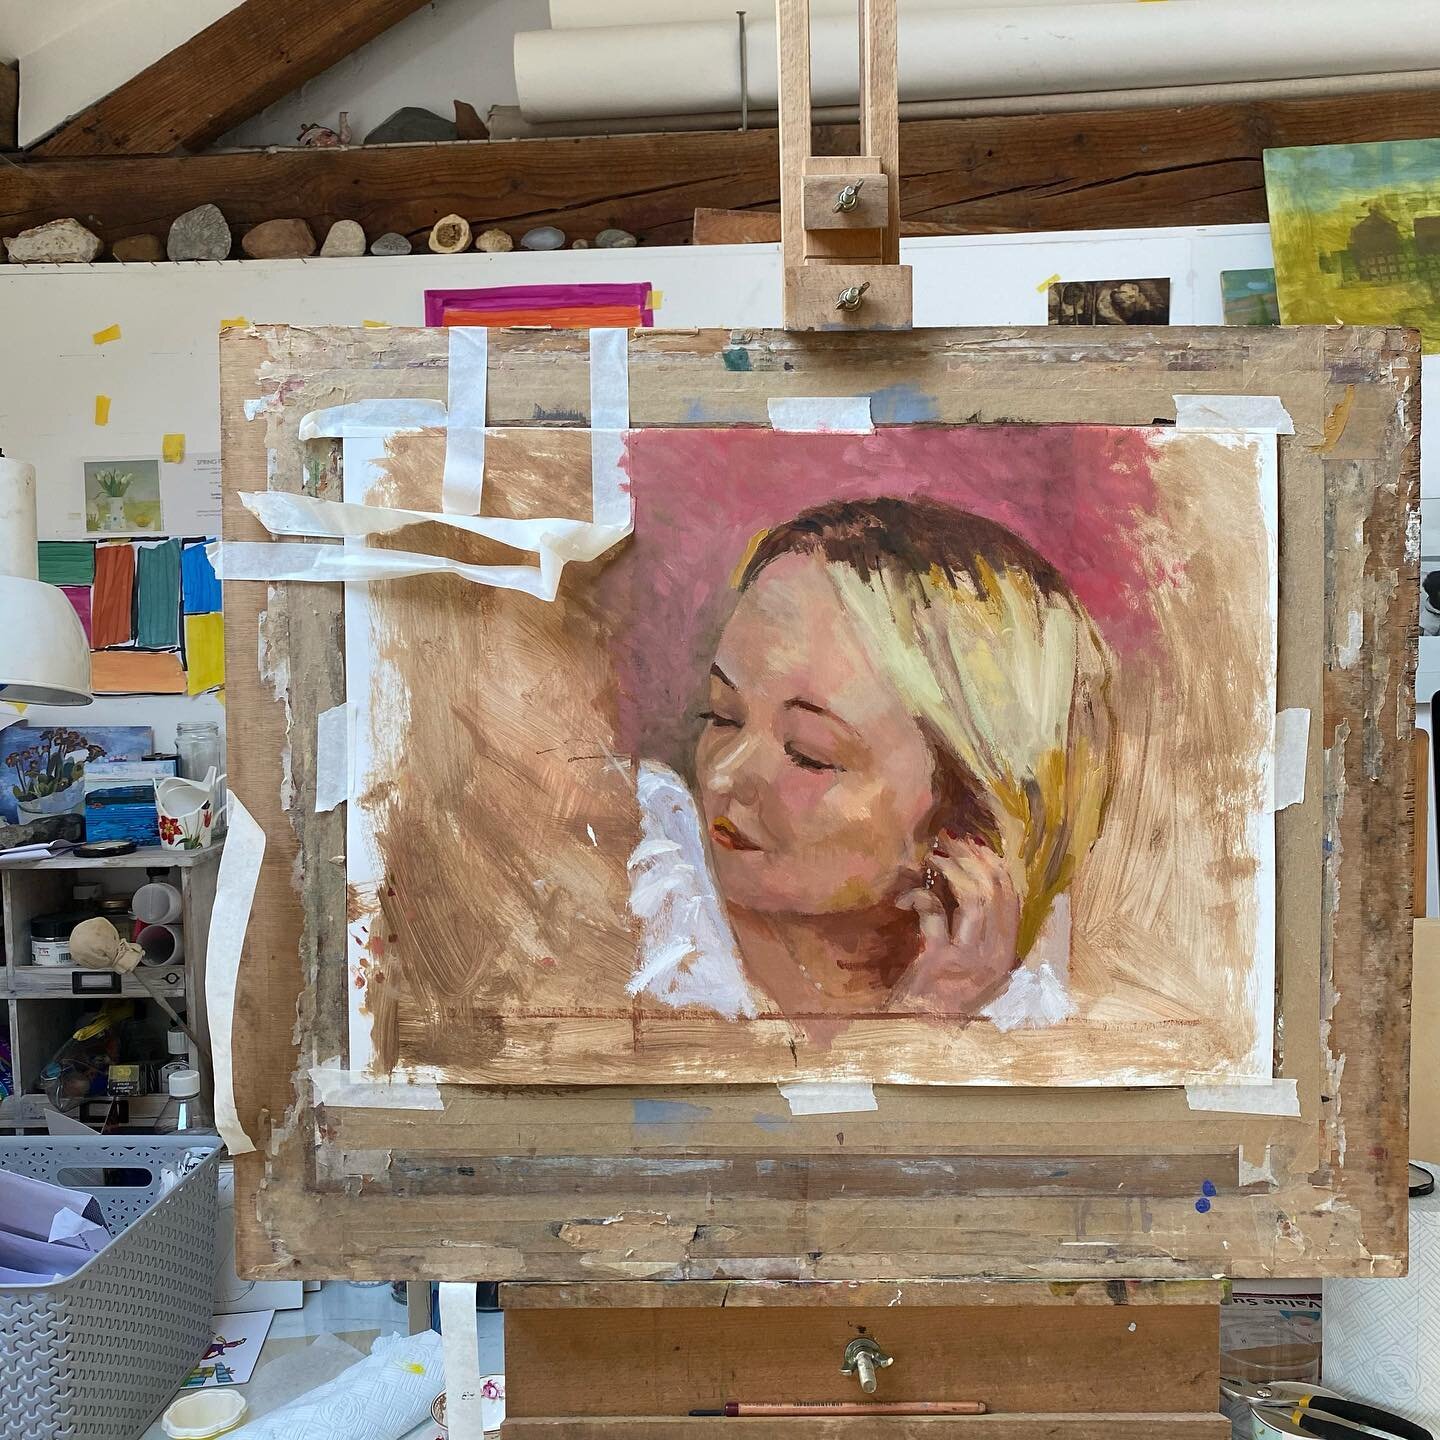 It has started again! Only managed to do a rough sketch of nicola coughlan. She is very lovely but very mobile. Had to work from my phone ( yuk!)
#paotw #oilsketch #oilonpaper